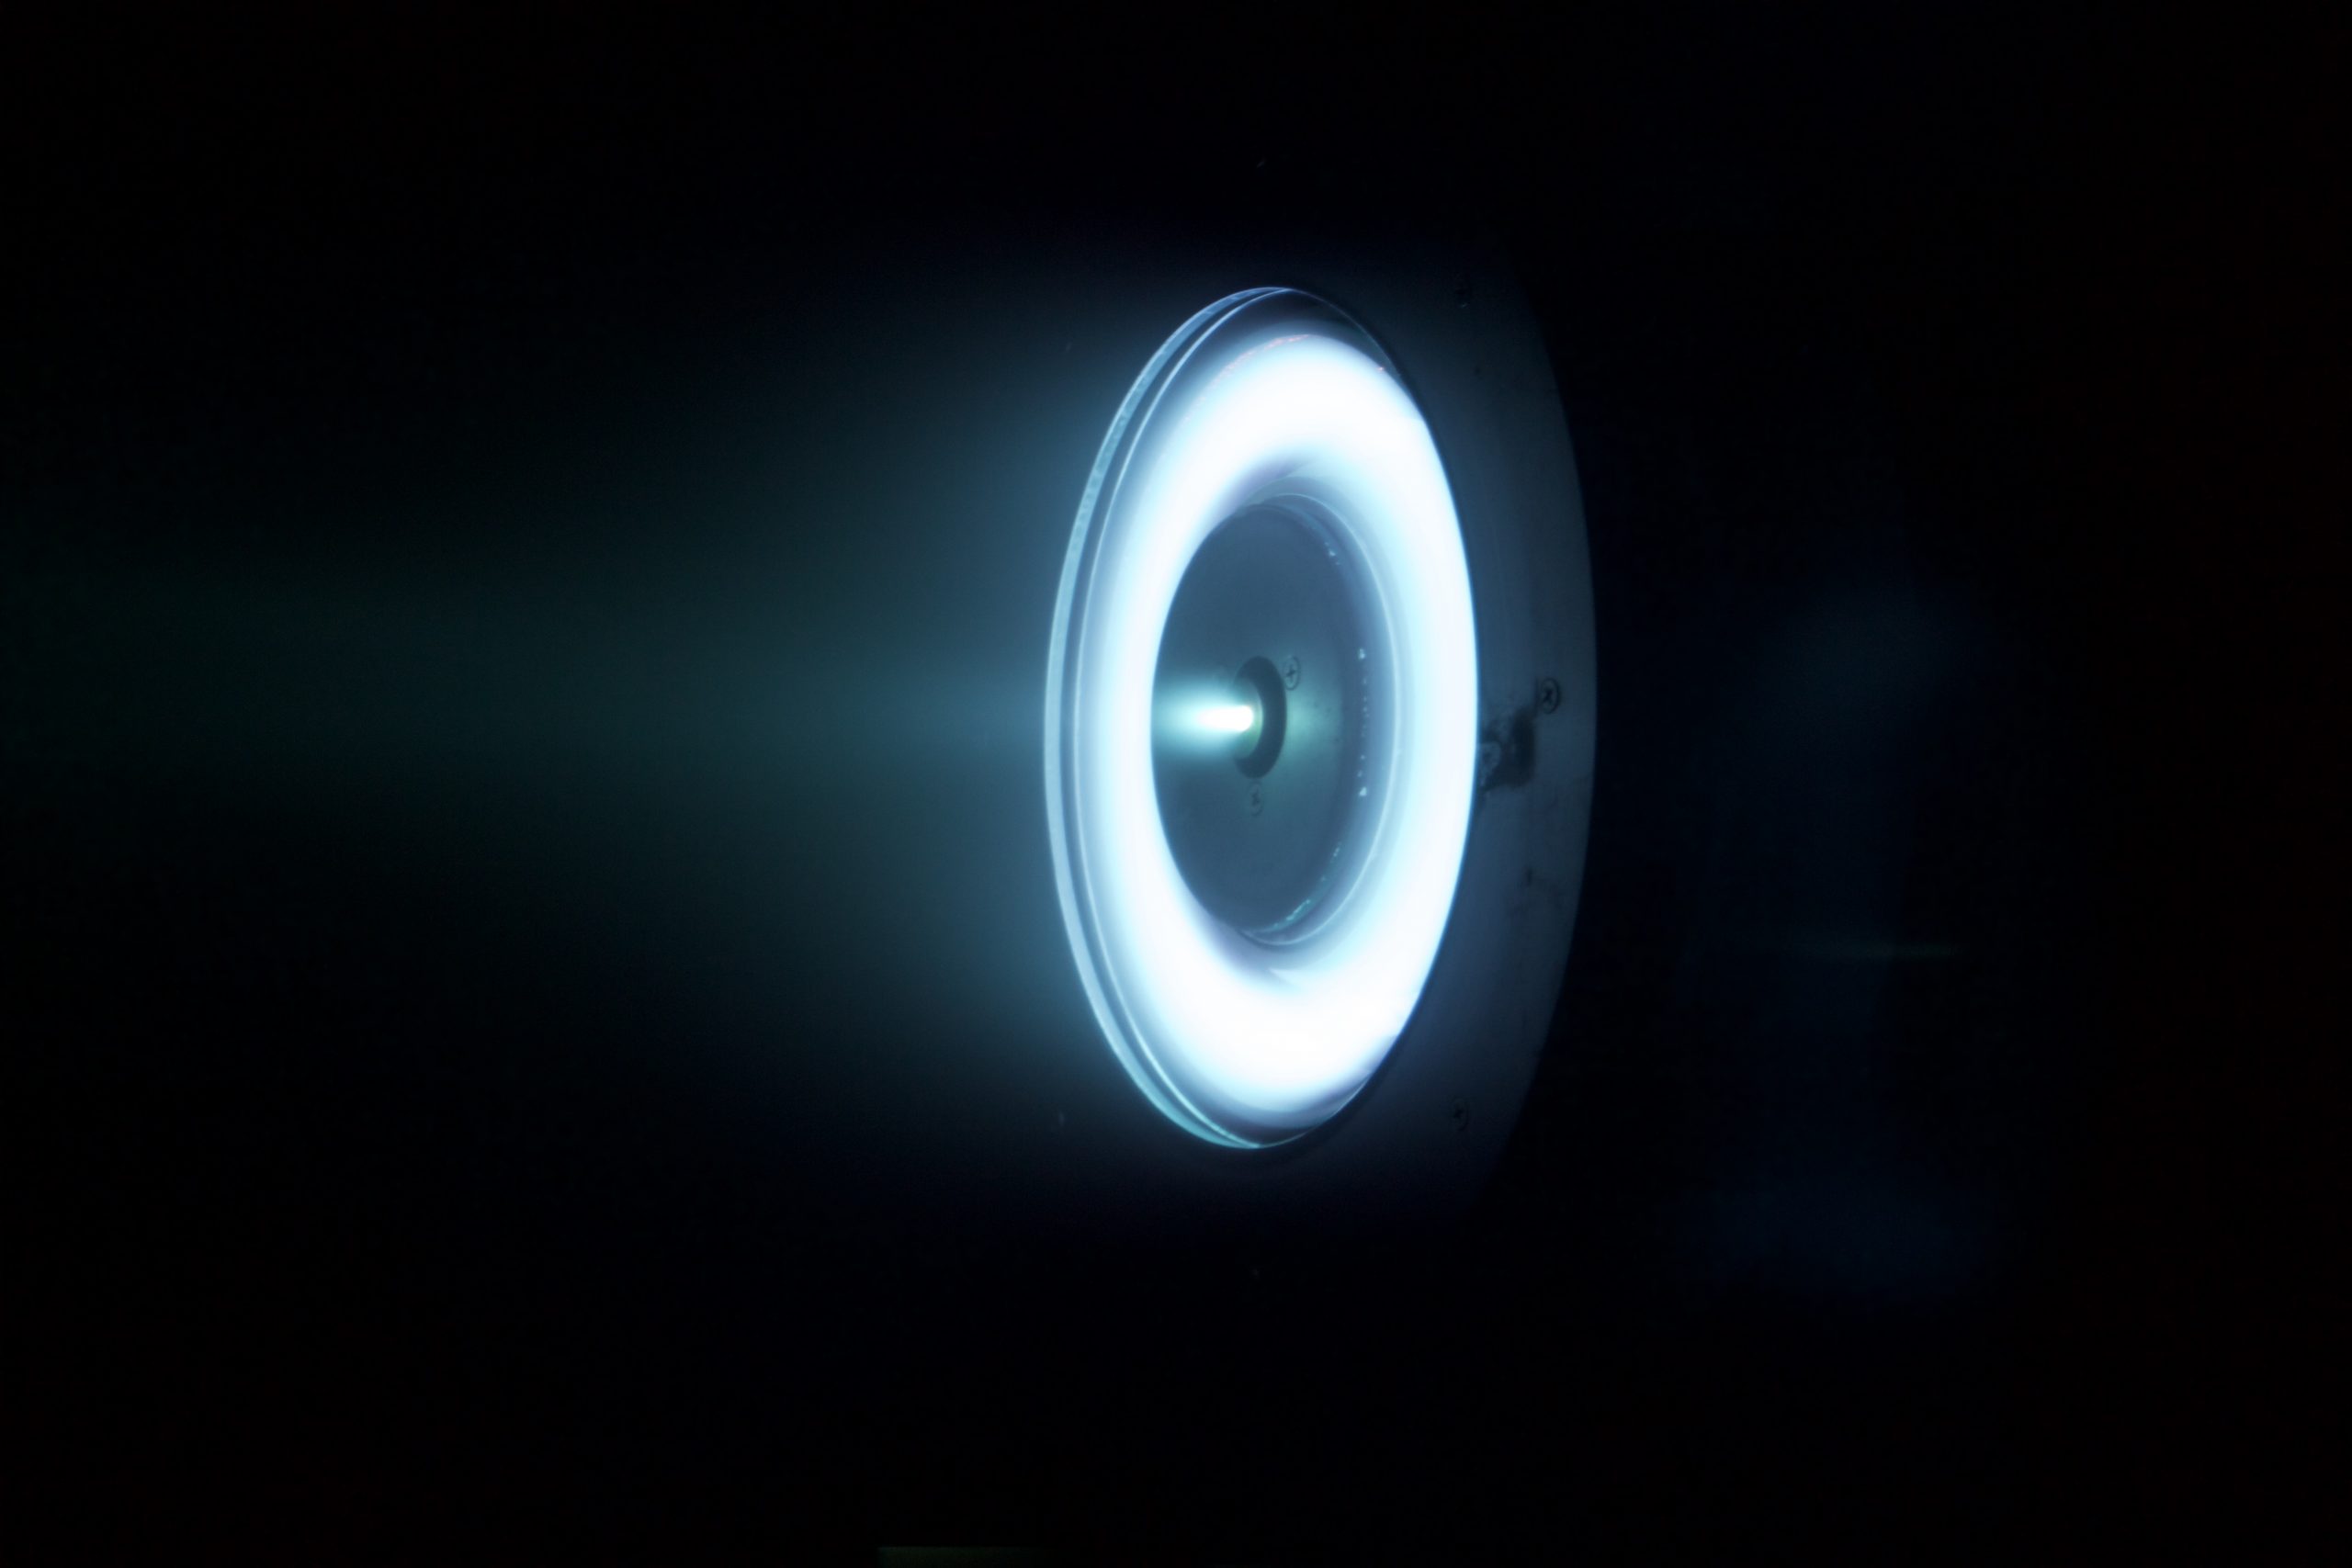 image showing a light from aerospace manufacturing products